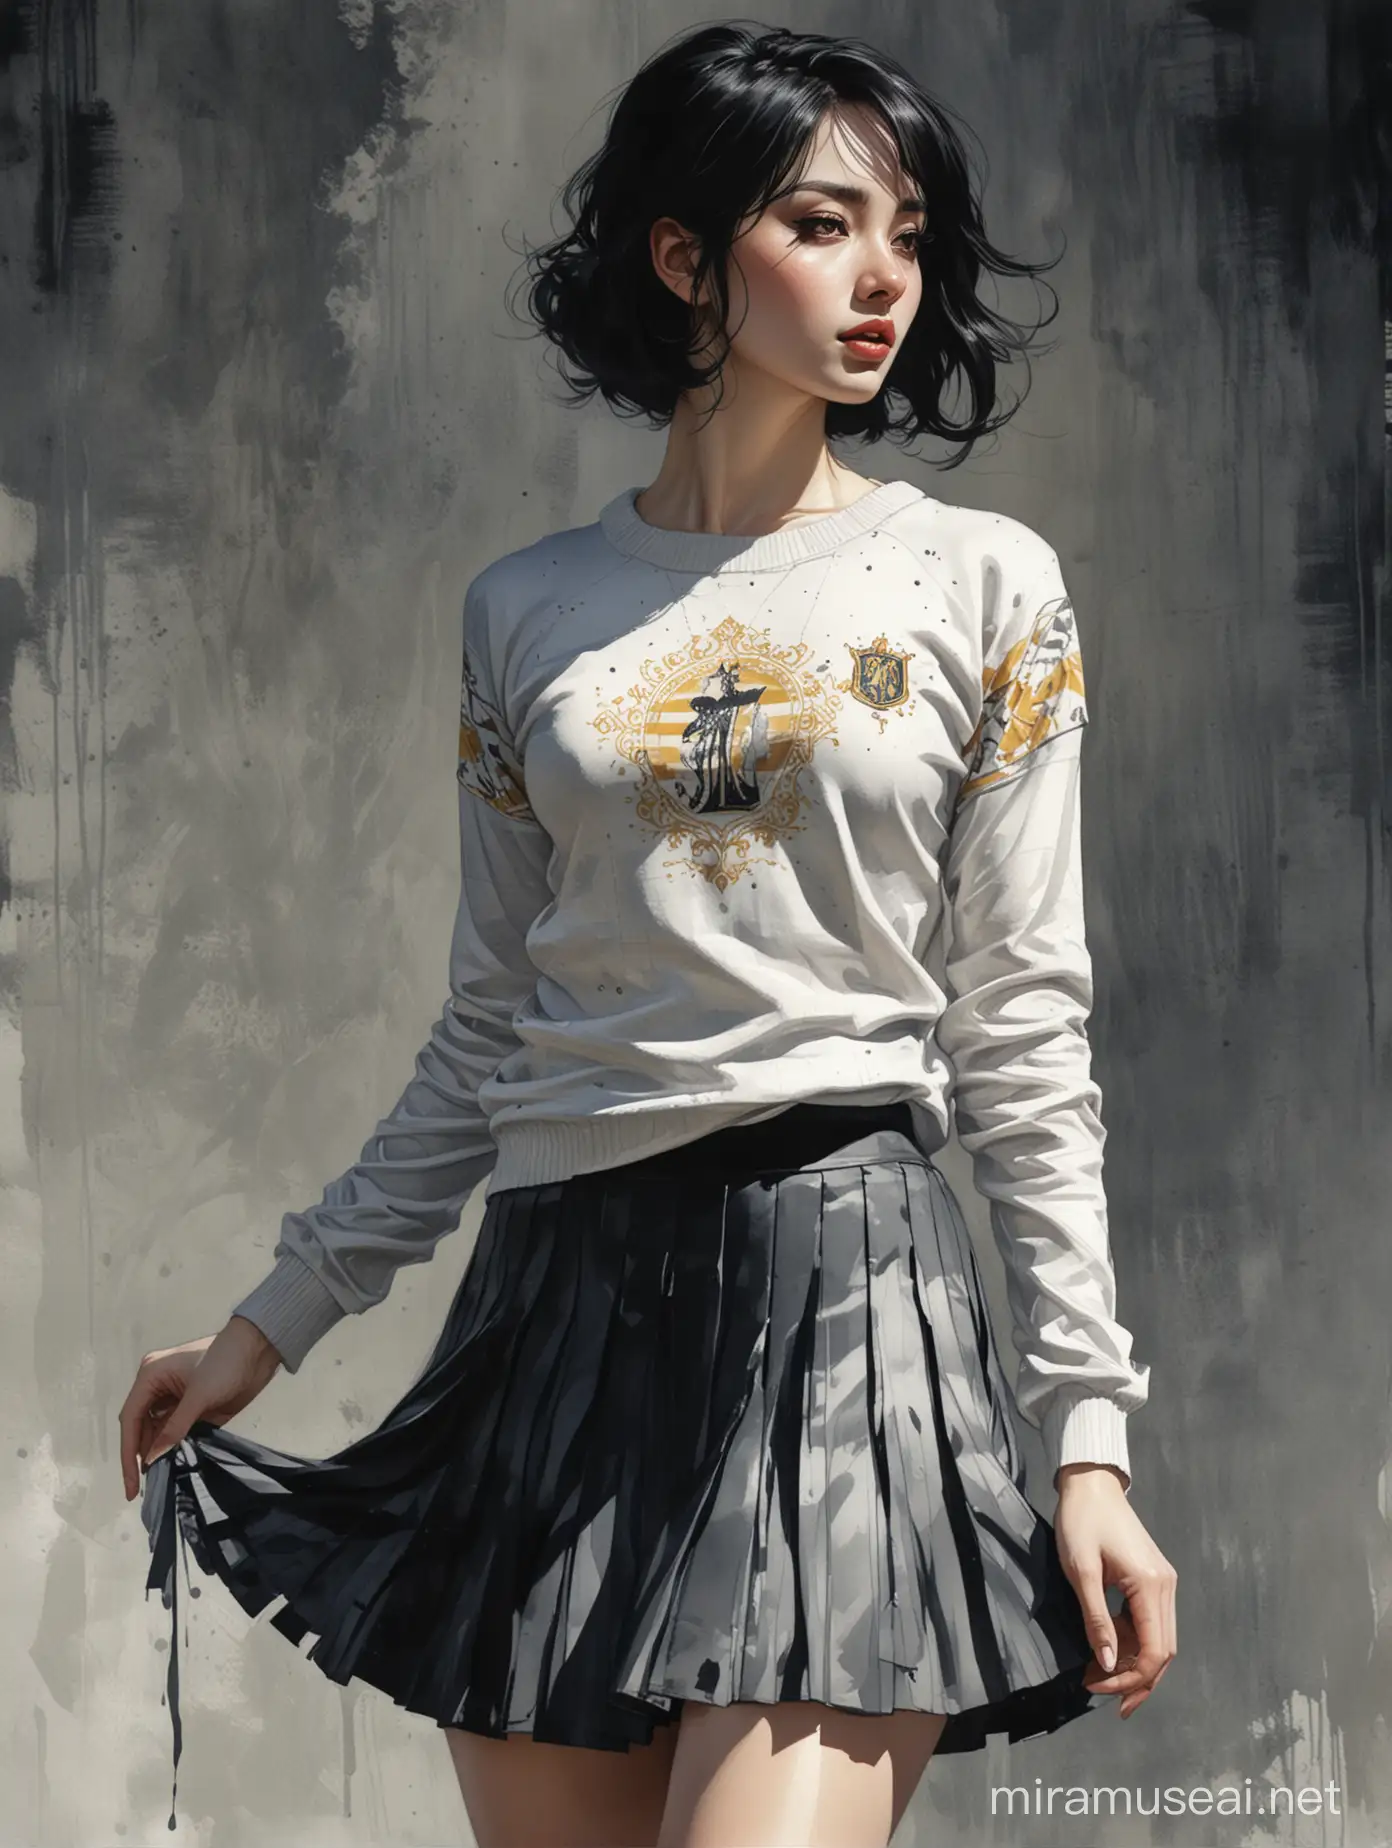 Sultry Sun Zhenni in Hogwarts Sweater and Pleated Skirt Illustration